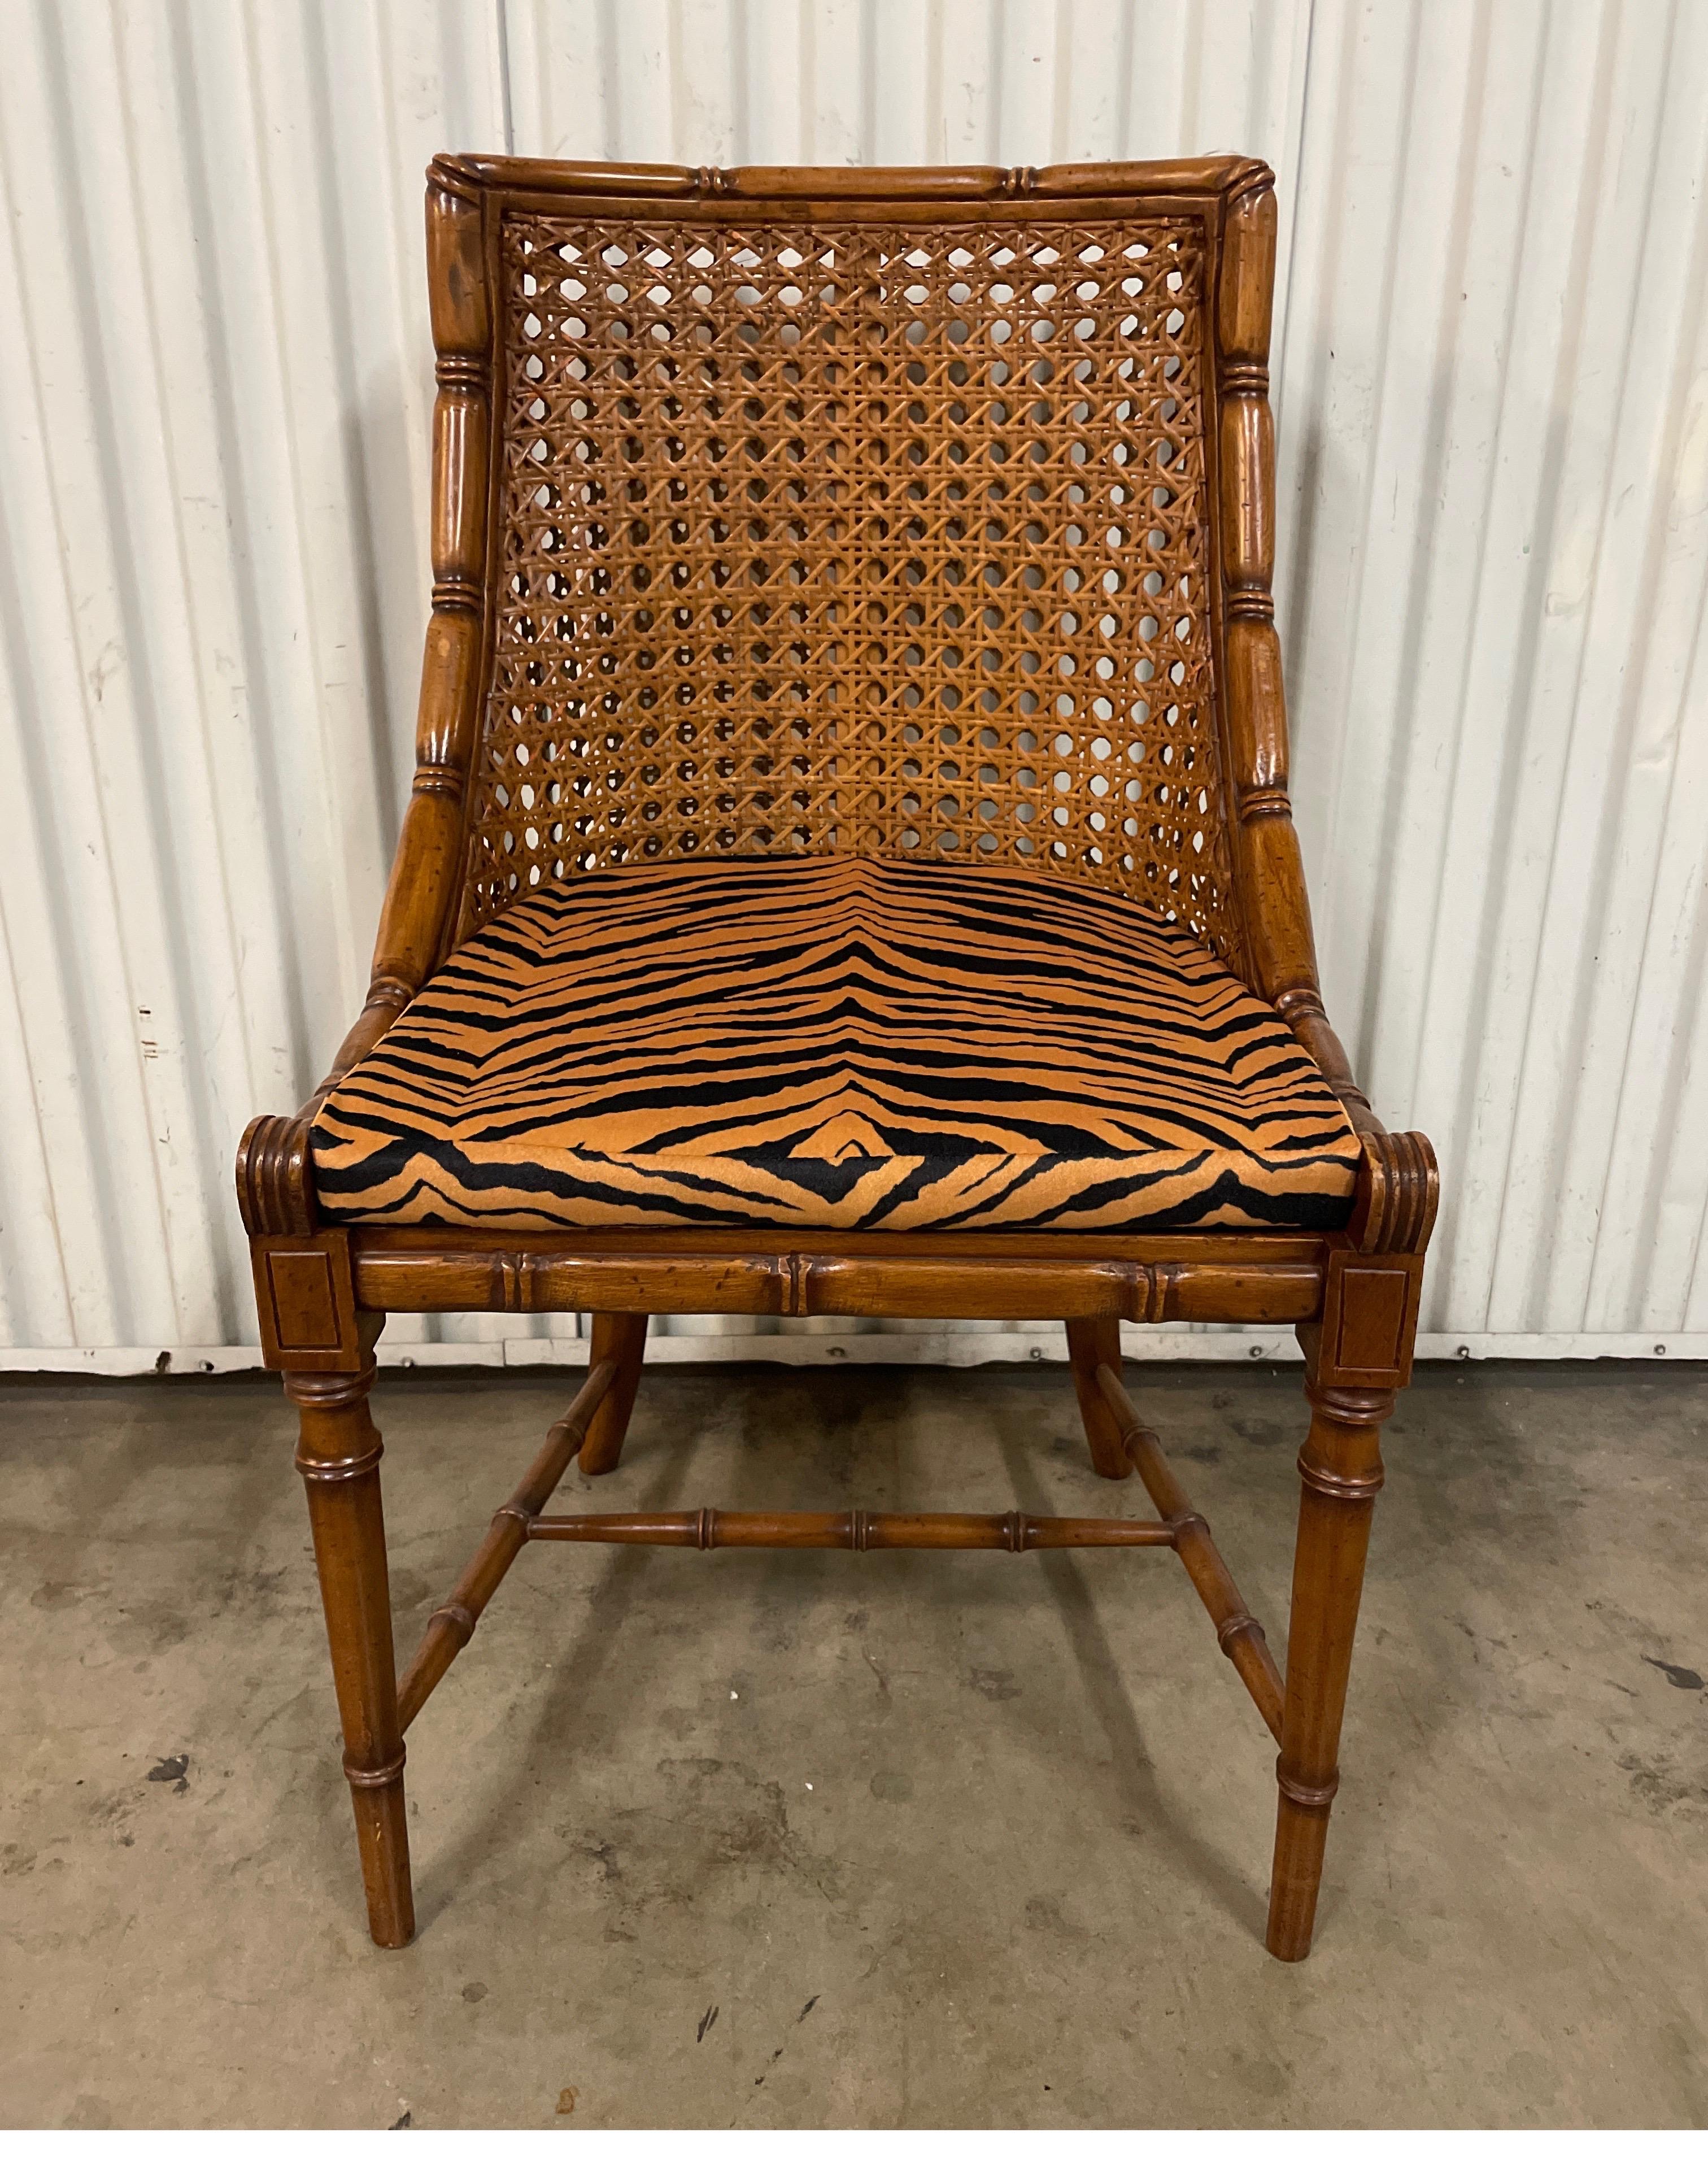 Vintage Italian Klismos style faux bamboo double caned back side chair with animal print loose cushion.